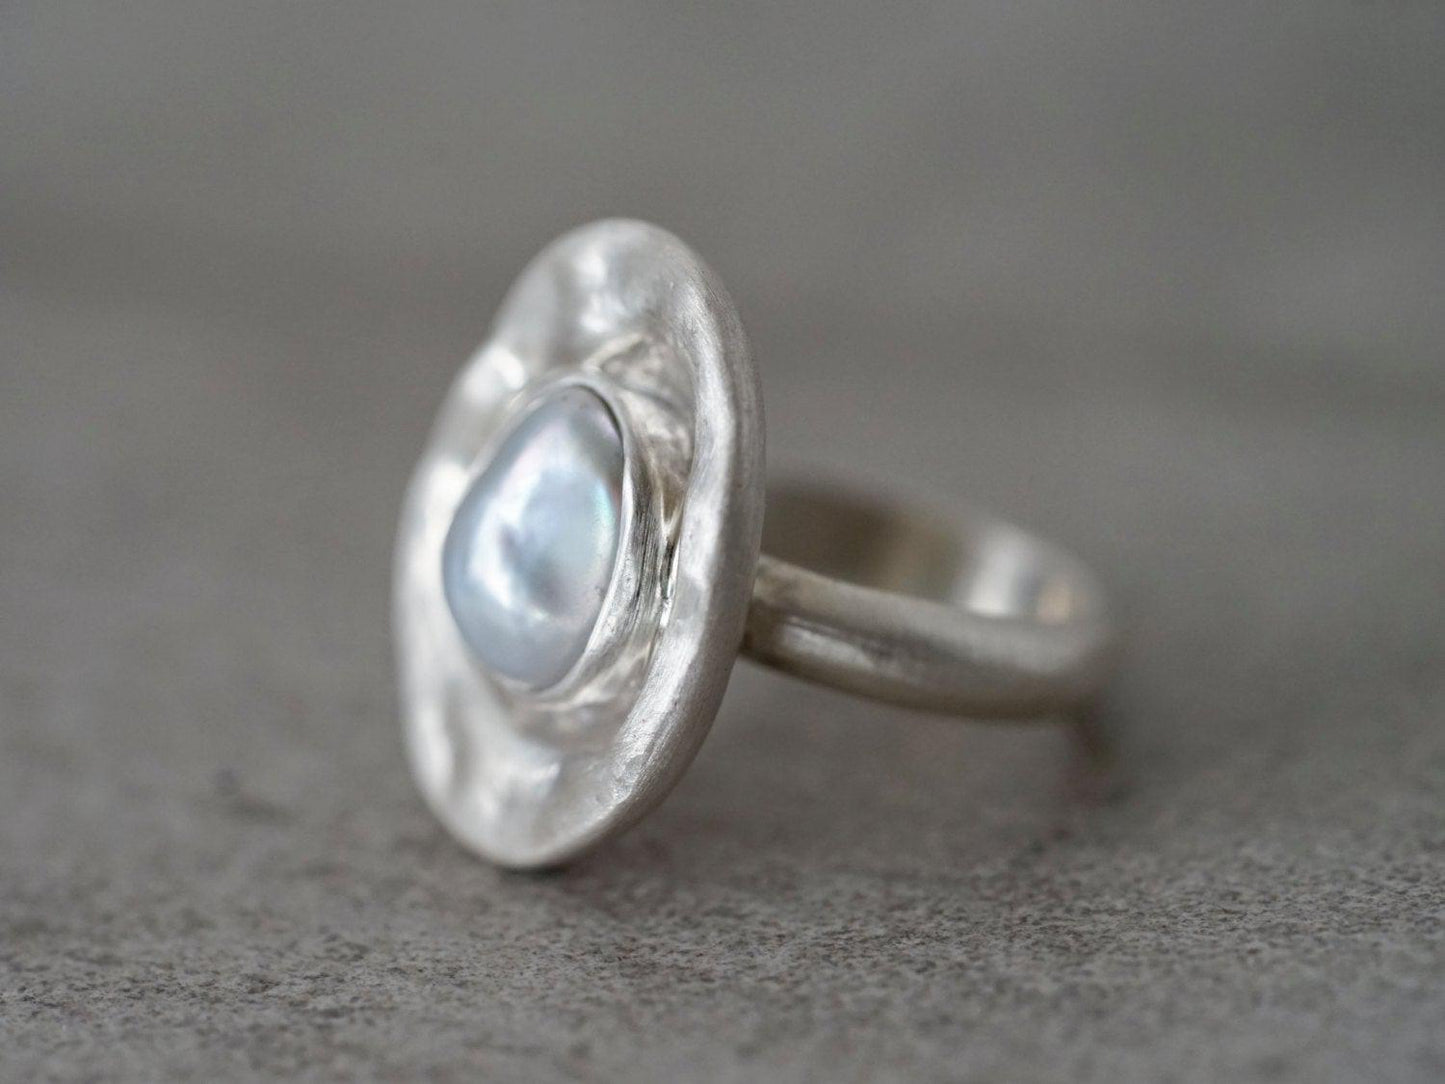 Freshwater pearl and sterling silver statement ring, size 6.25